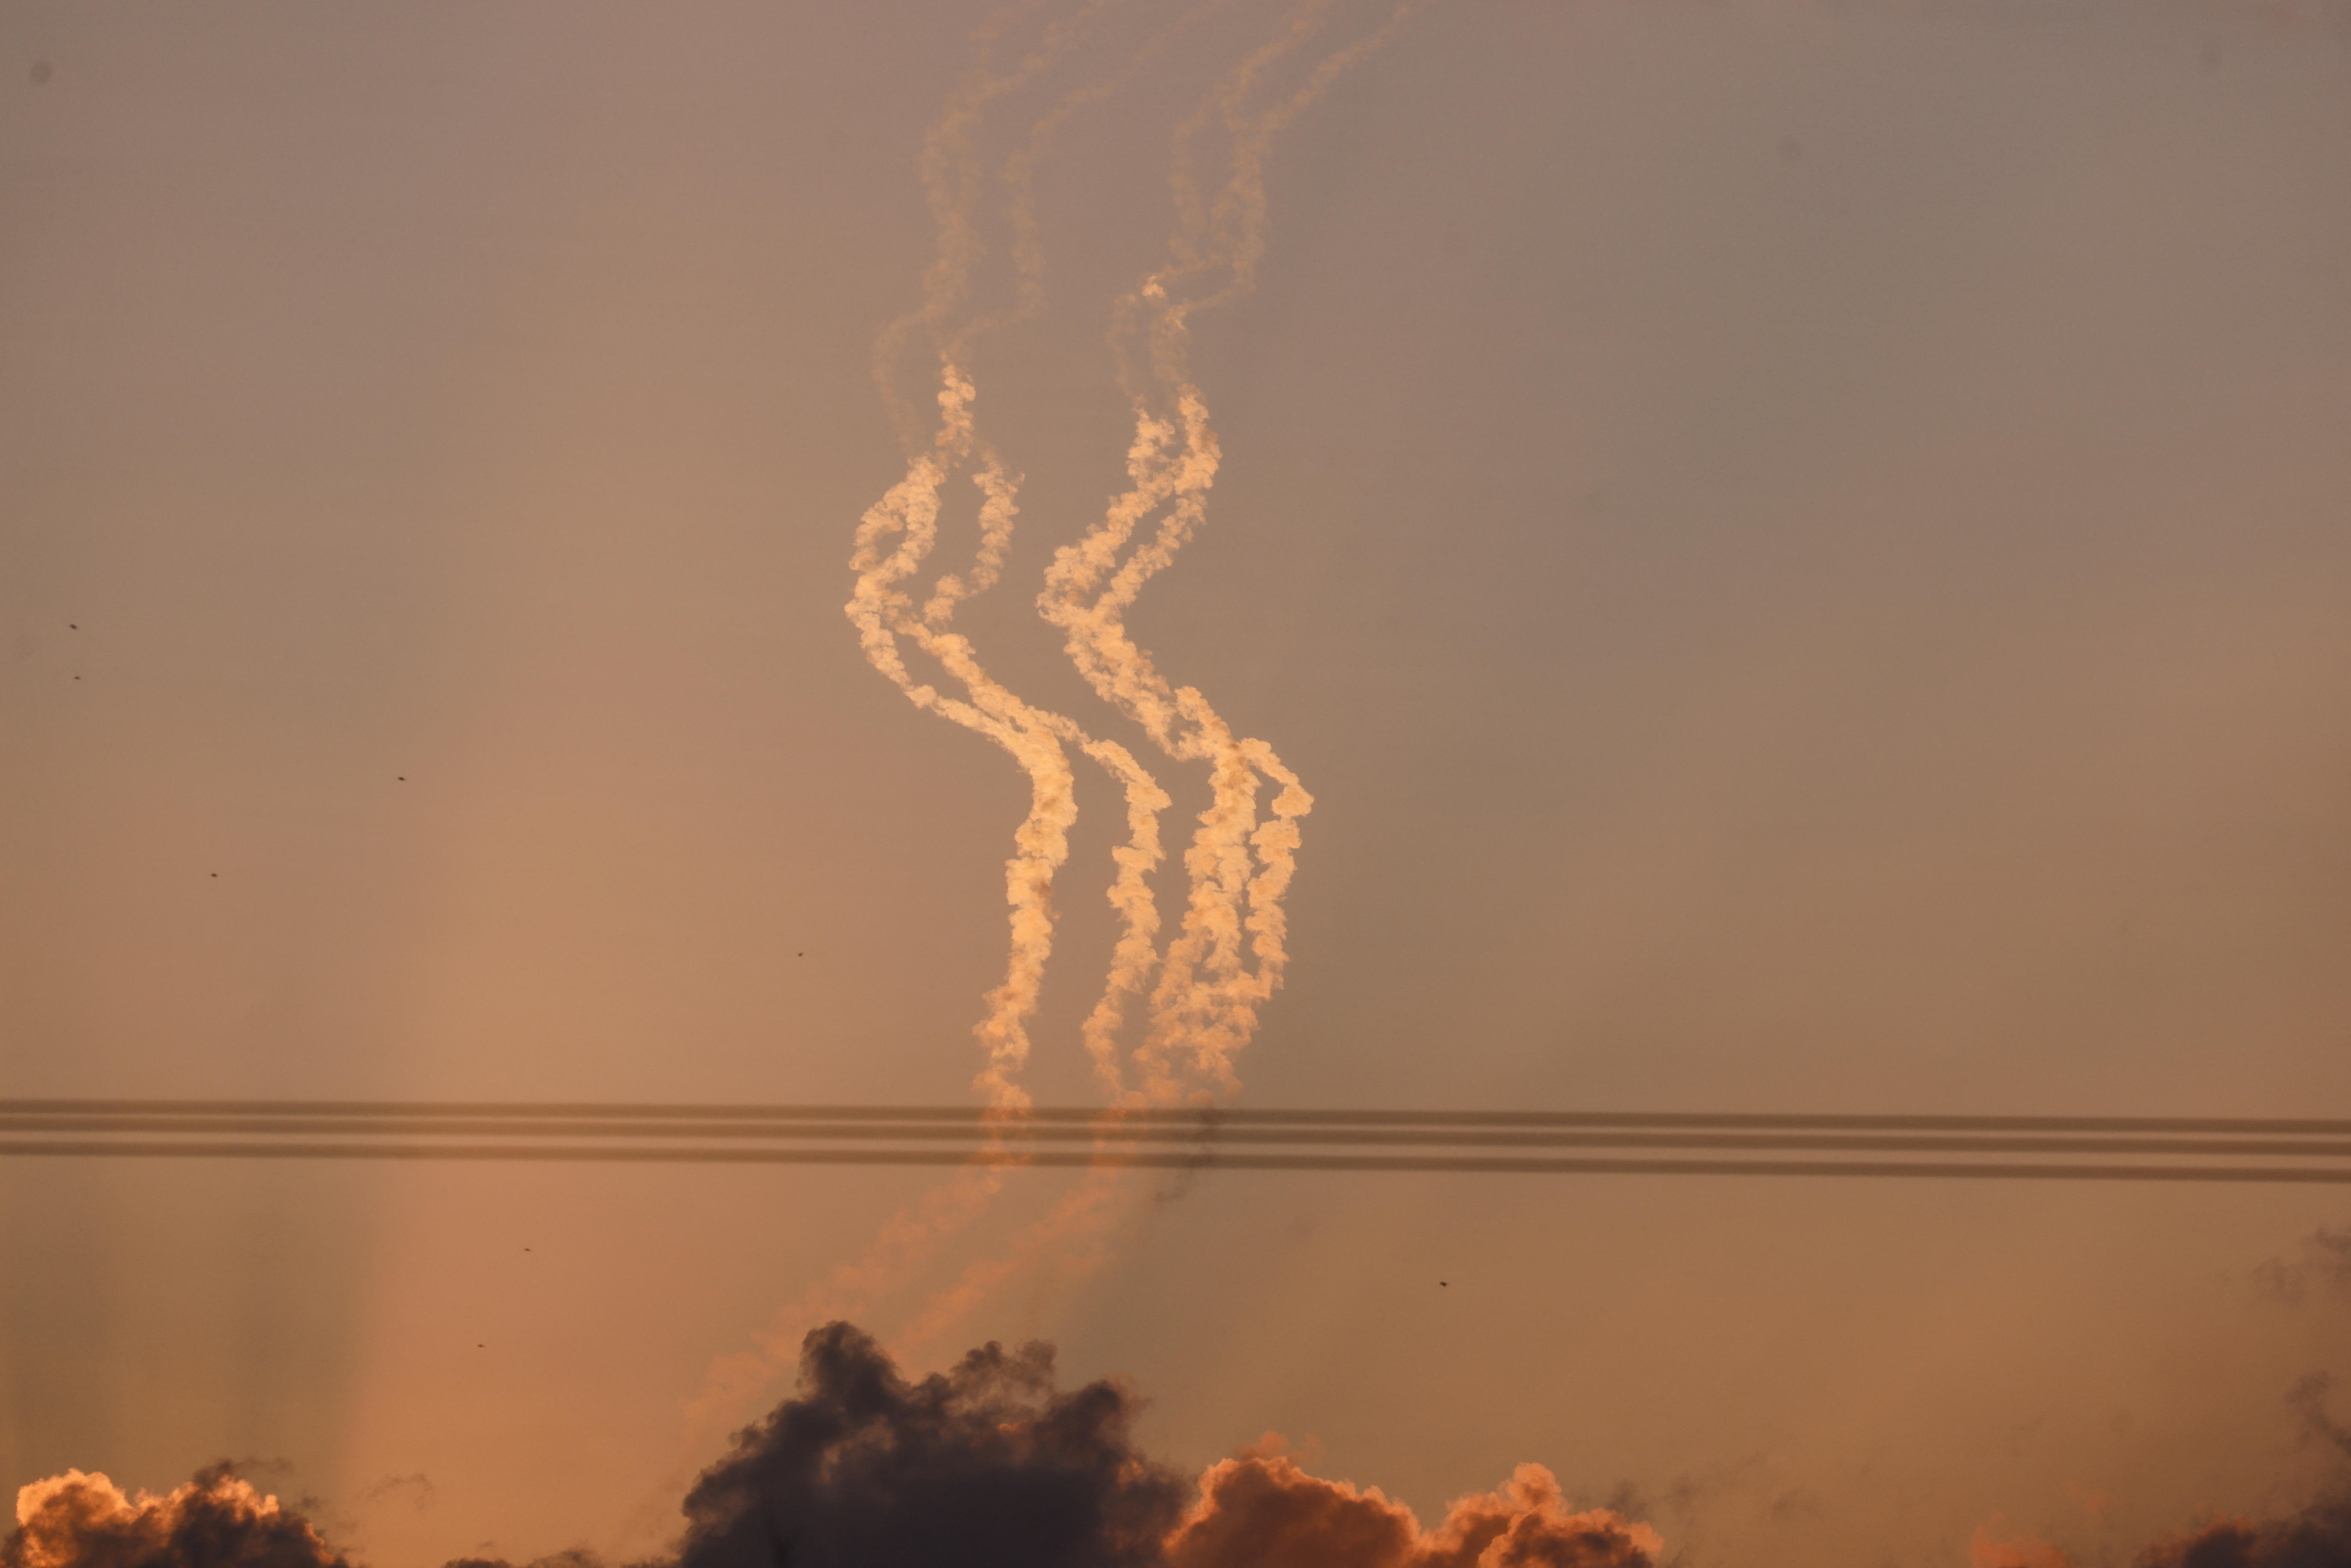 Trails of smoke are seen in the sky, amid the ongoing conflict between Israel and the Palestinian Islamist group Hamas